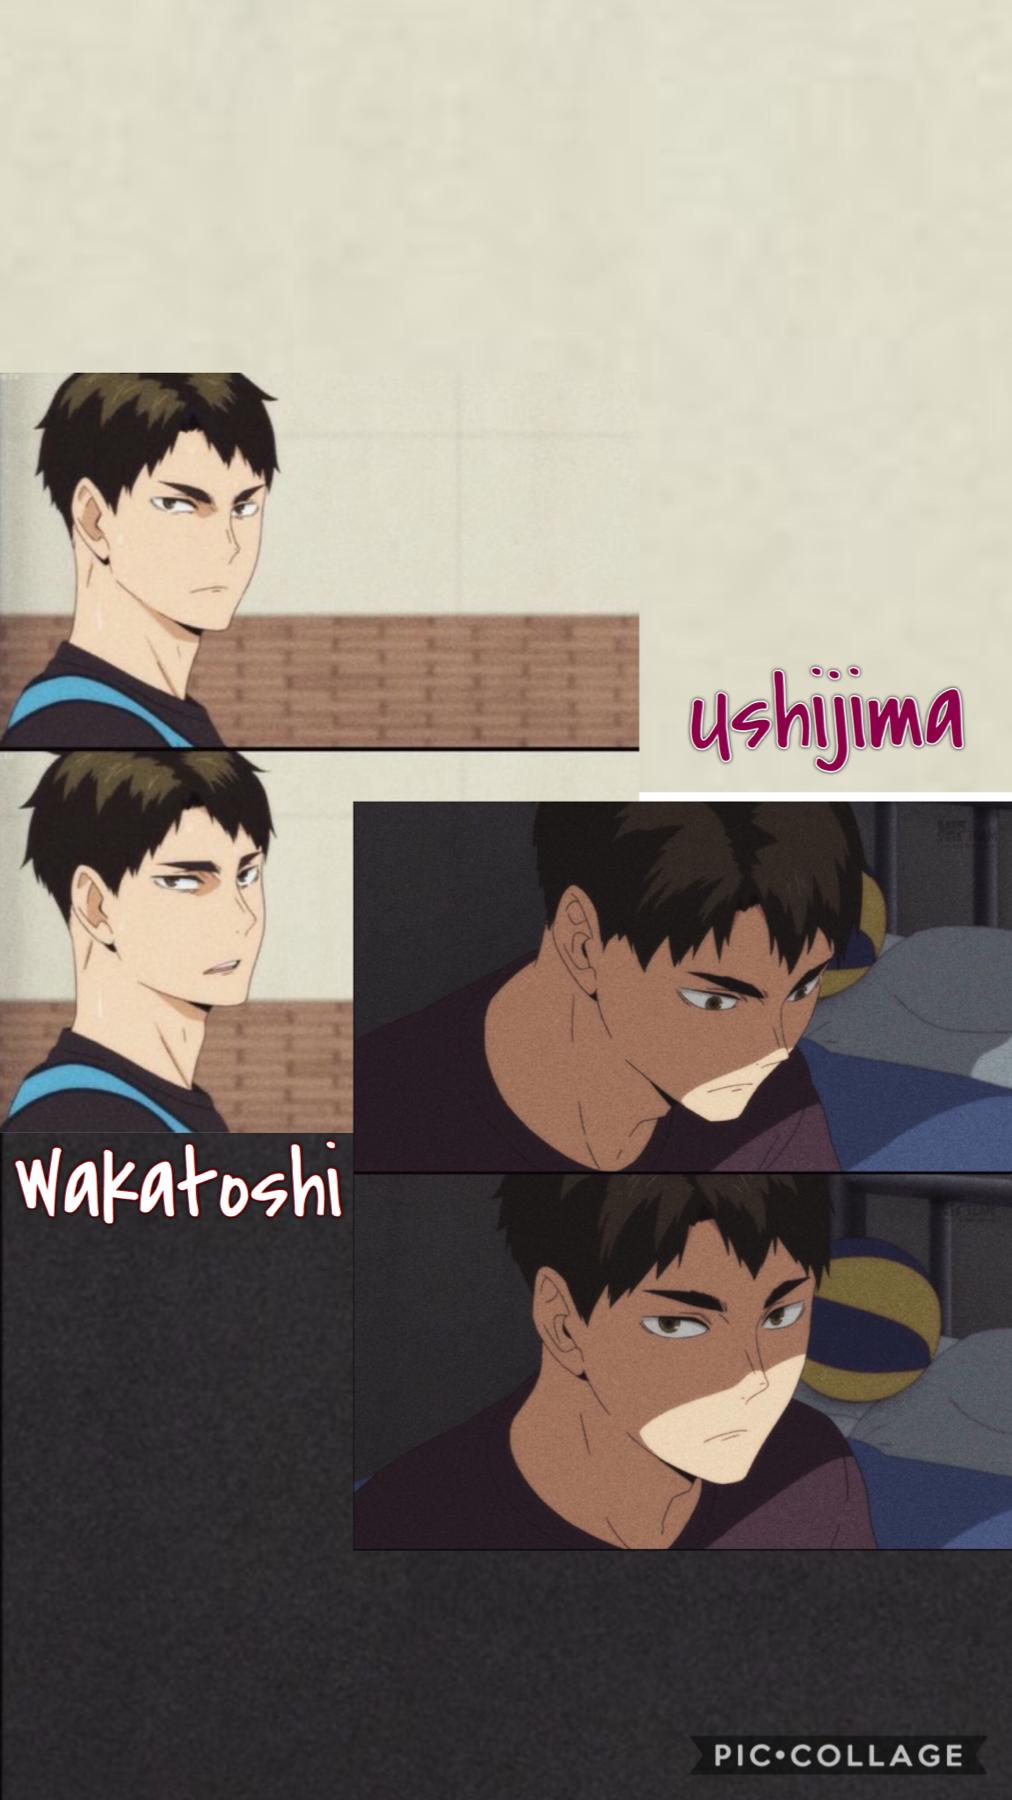 •My 🐝•
Hi it’s been a hot minute since I’ve posted on this account. I’m currently working on an edit for my main but here’s a Ushijima (Haikyuu) wallpaper I made lol.
I literally love him so much oml